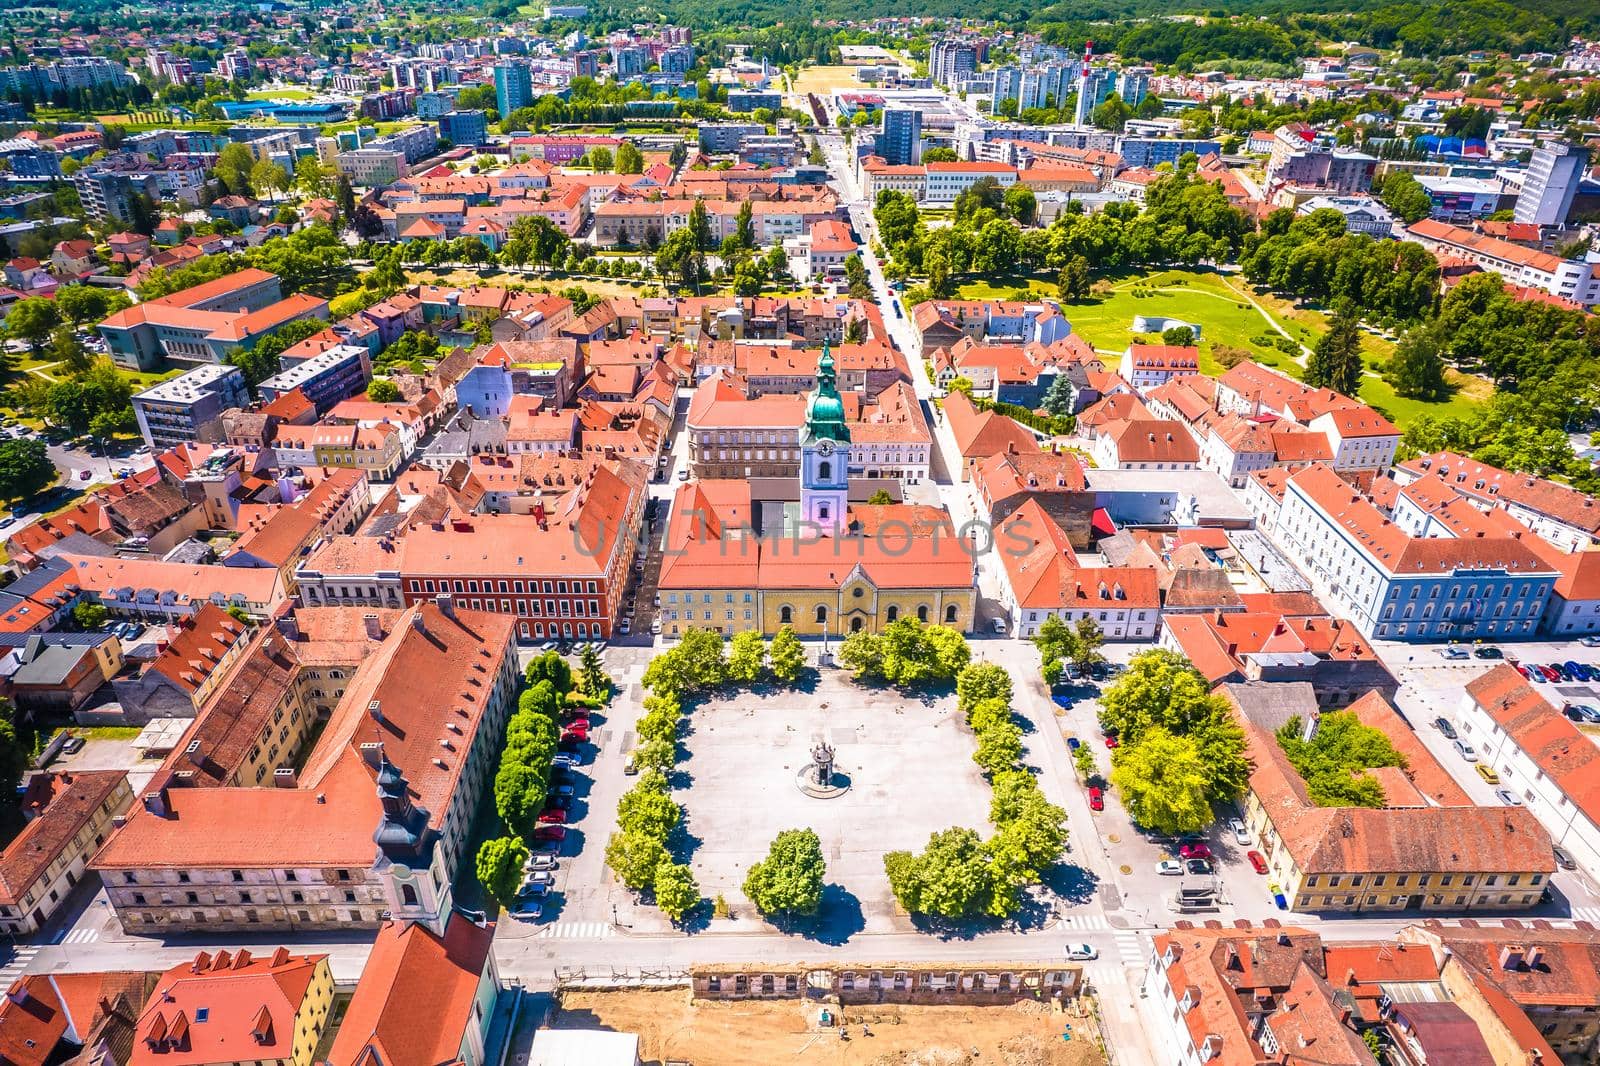 Town of Karlovac historic city center aerial view by xbrchx